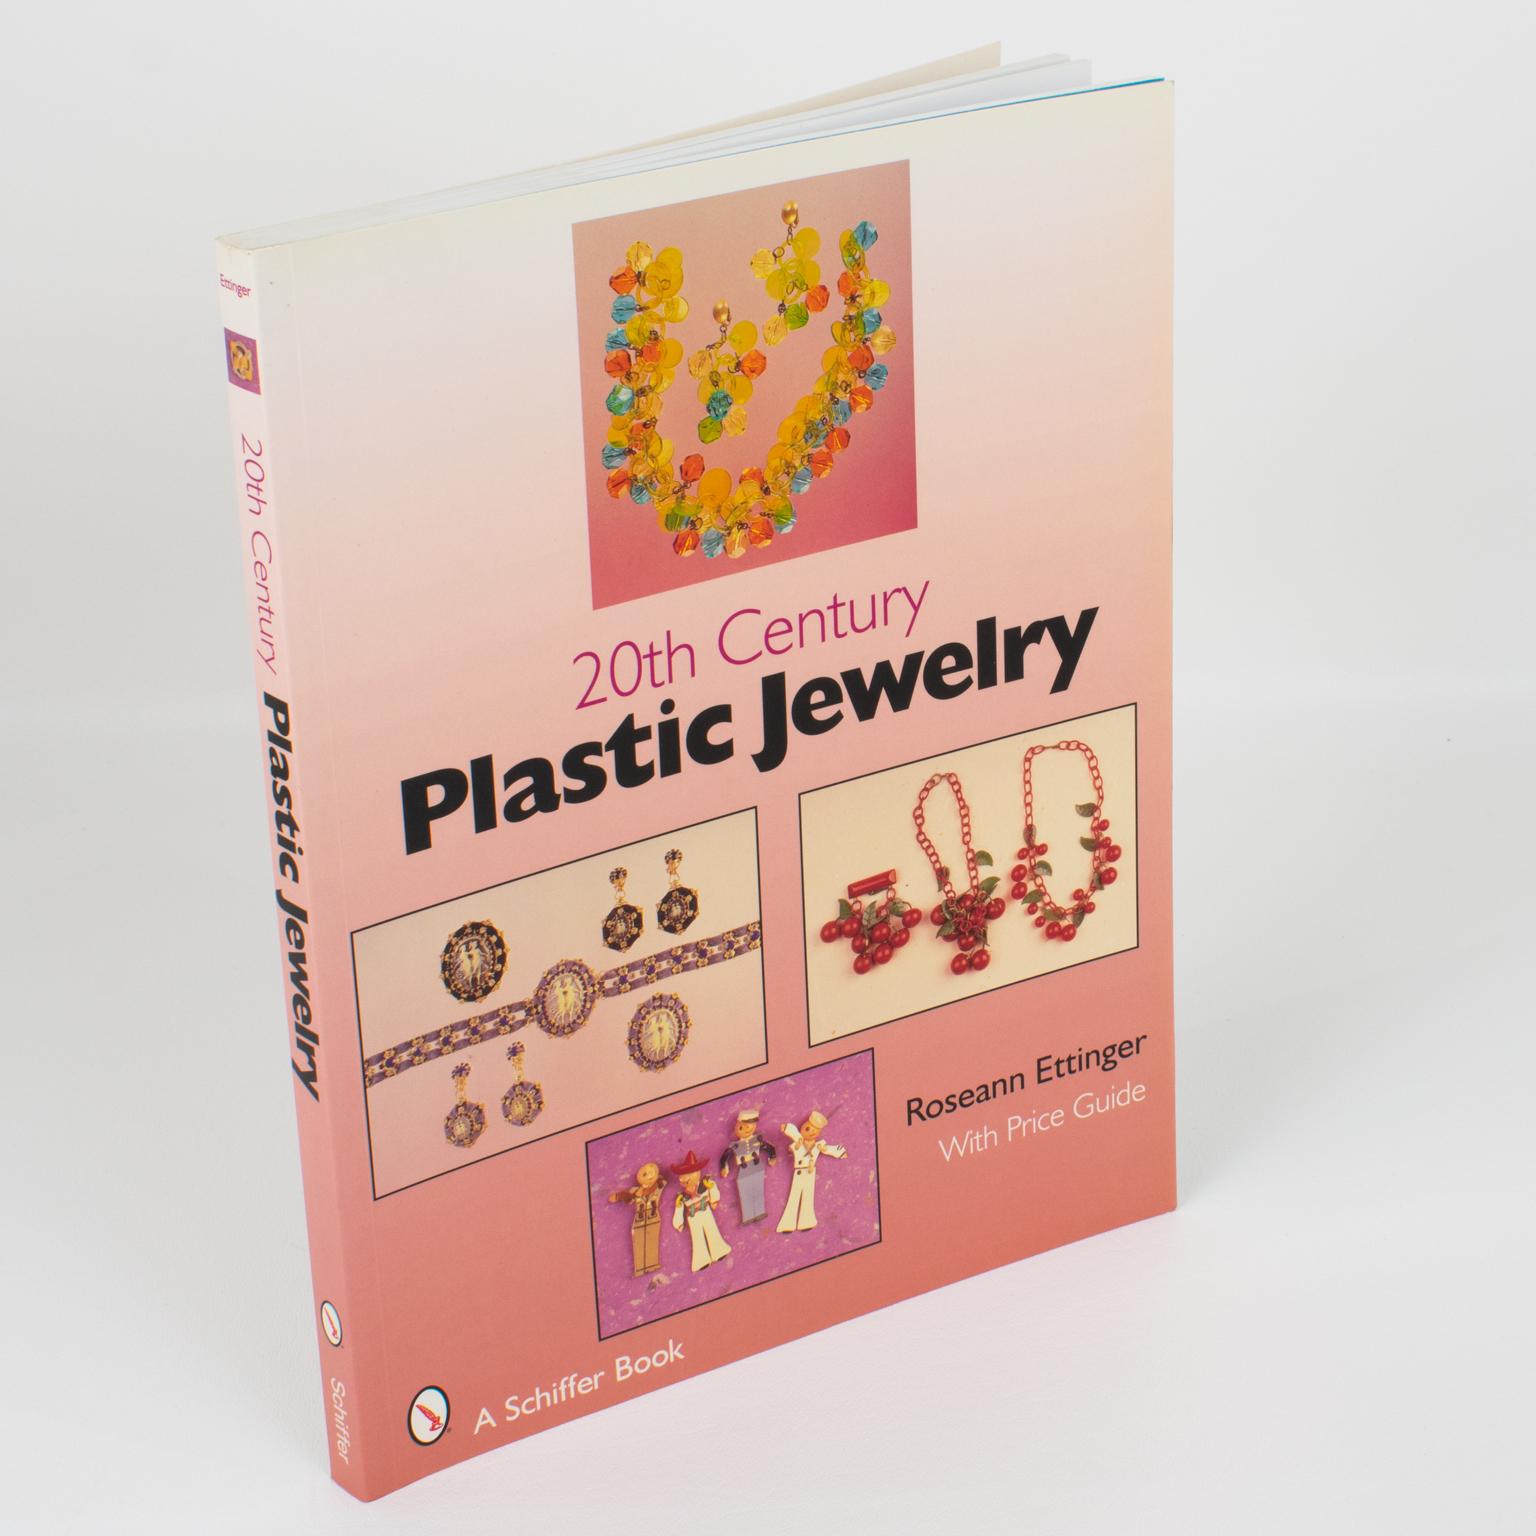 20th Century Plastic Jewelry, English book by Roseann Ettinger, 2007.
Explore designs for jewelry in natural and synthetic plastics throughout the 20th century. This fun and visually exciting book presents chronologically lavish and popular jewelry